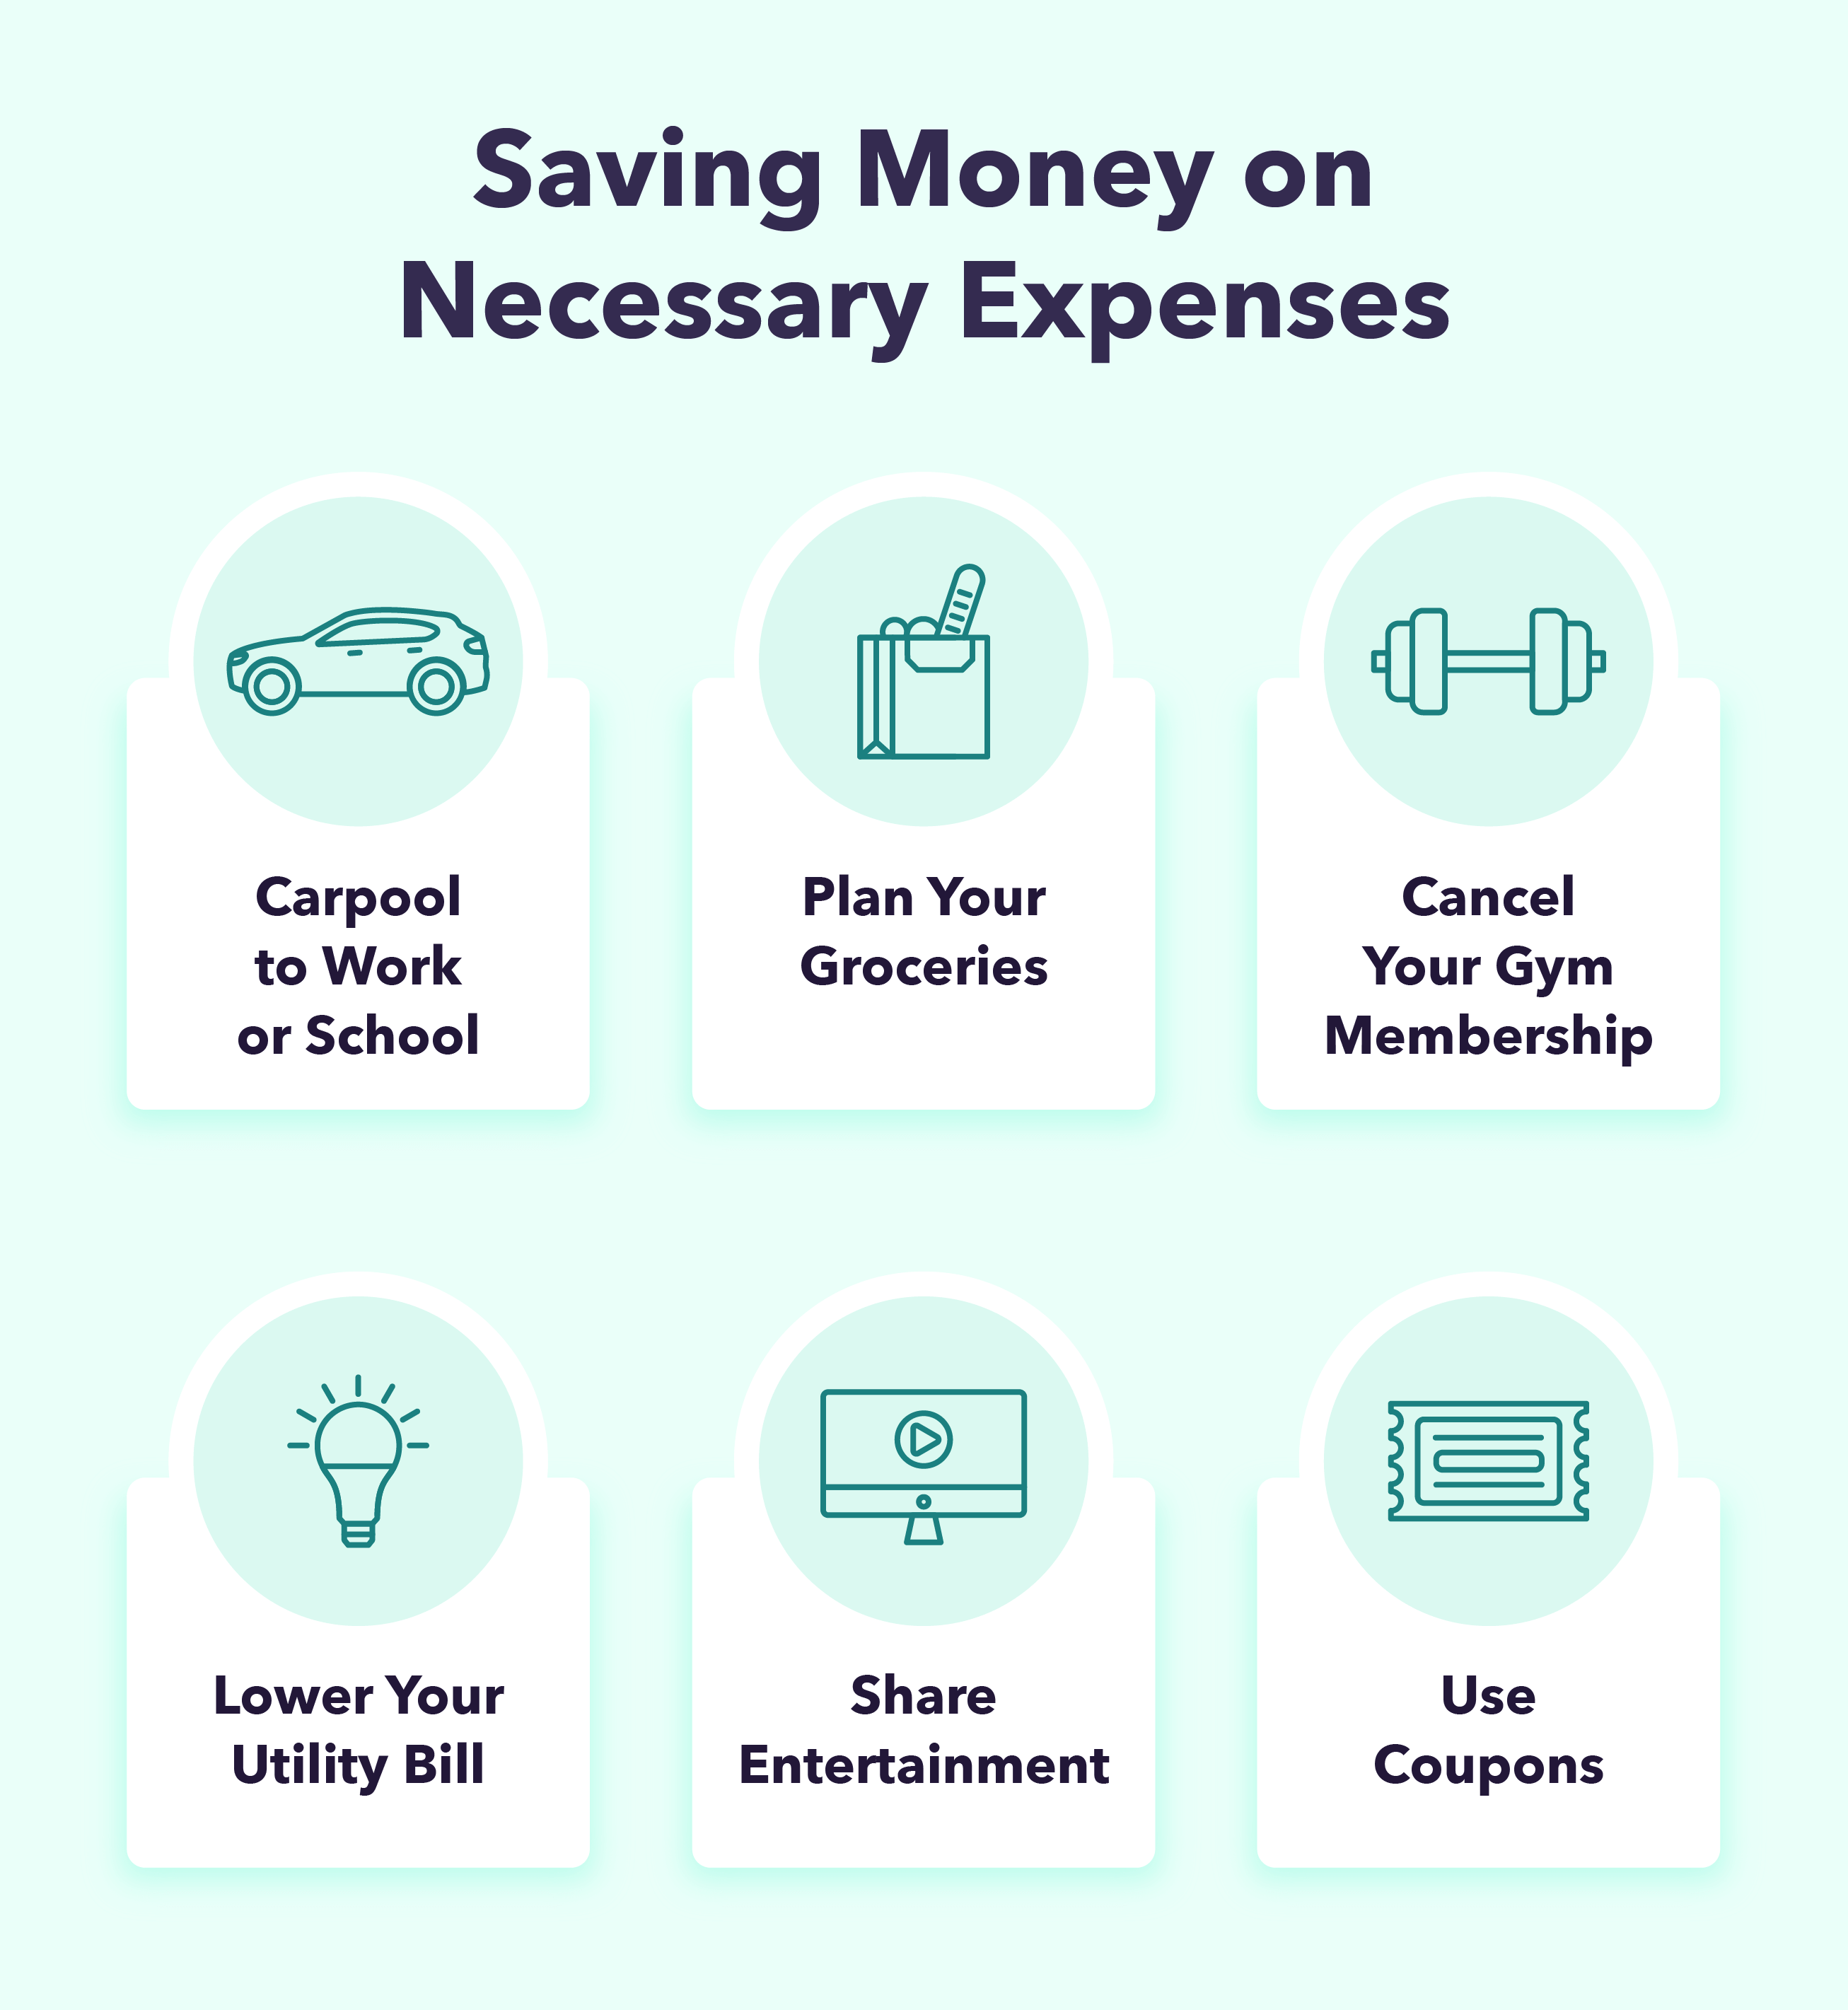 A graphic explains how to start saving money on necessary expenses.